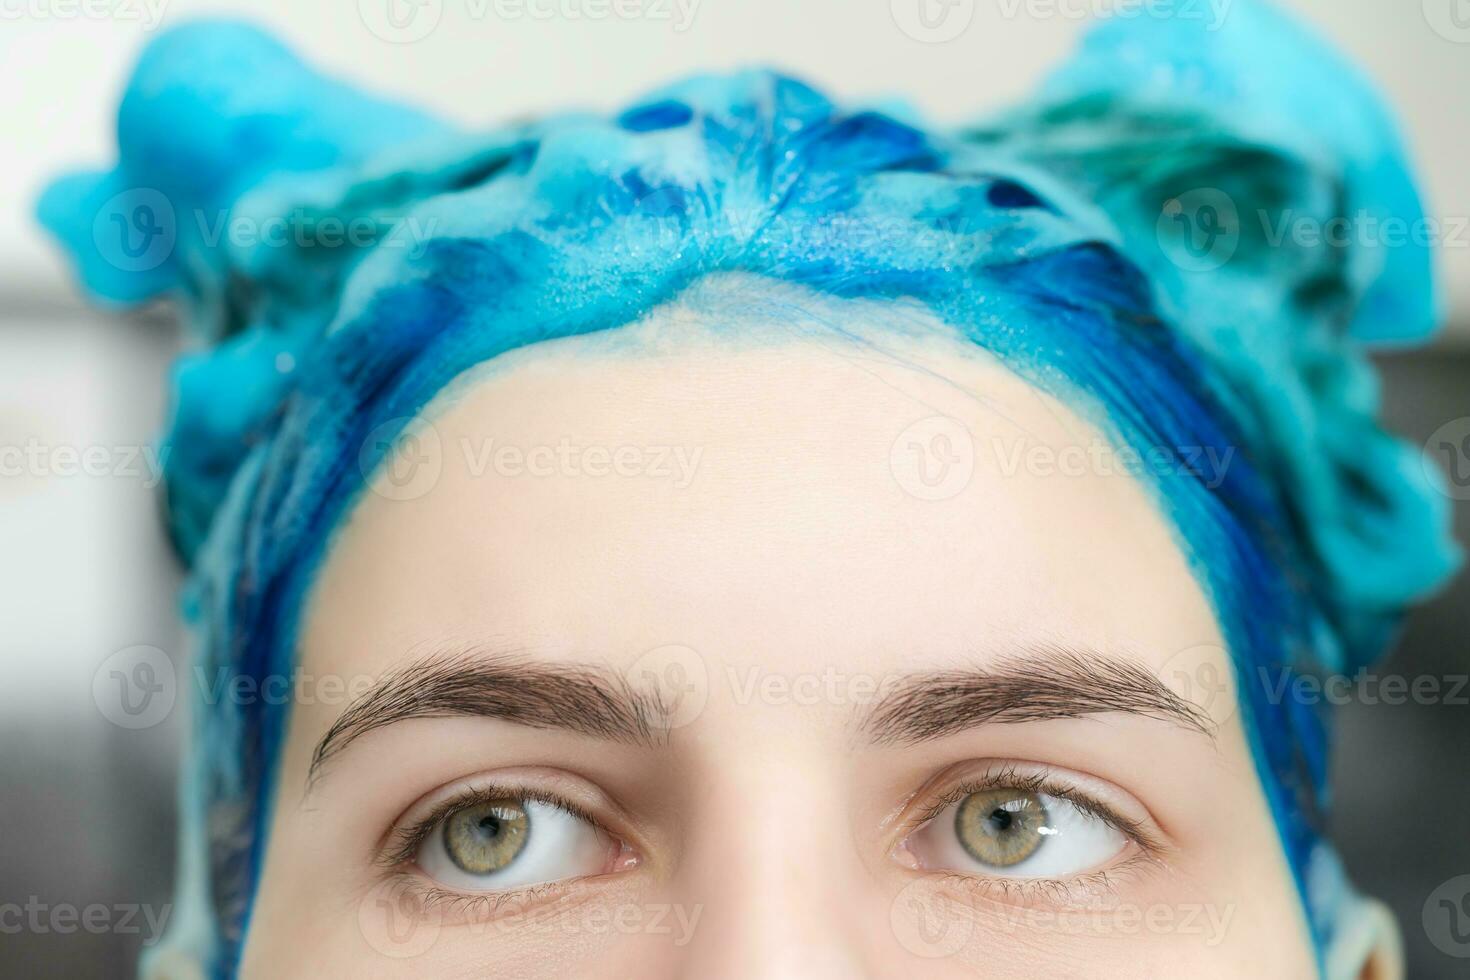 Close-up view of girl with blue hair and big eyes with shampoo applied while washing her hair after dyeing her sapphire hair in beauty salon photo